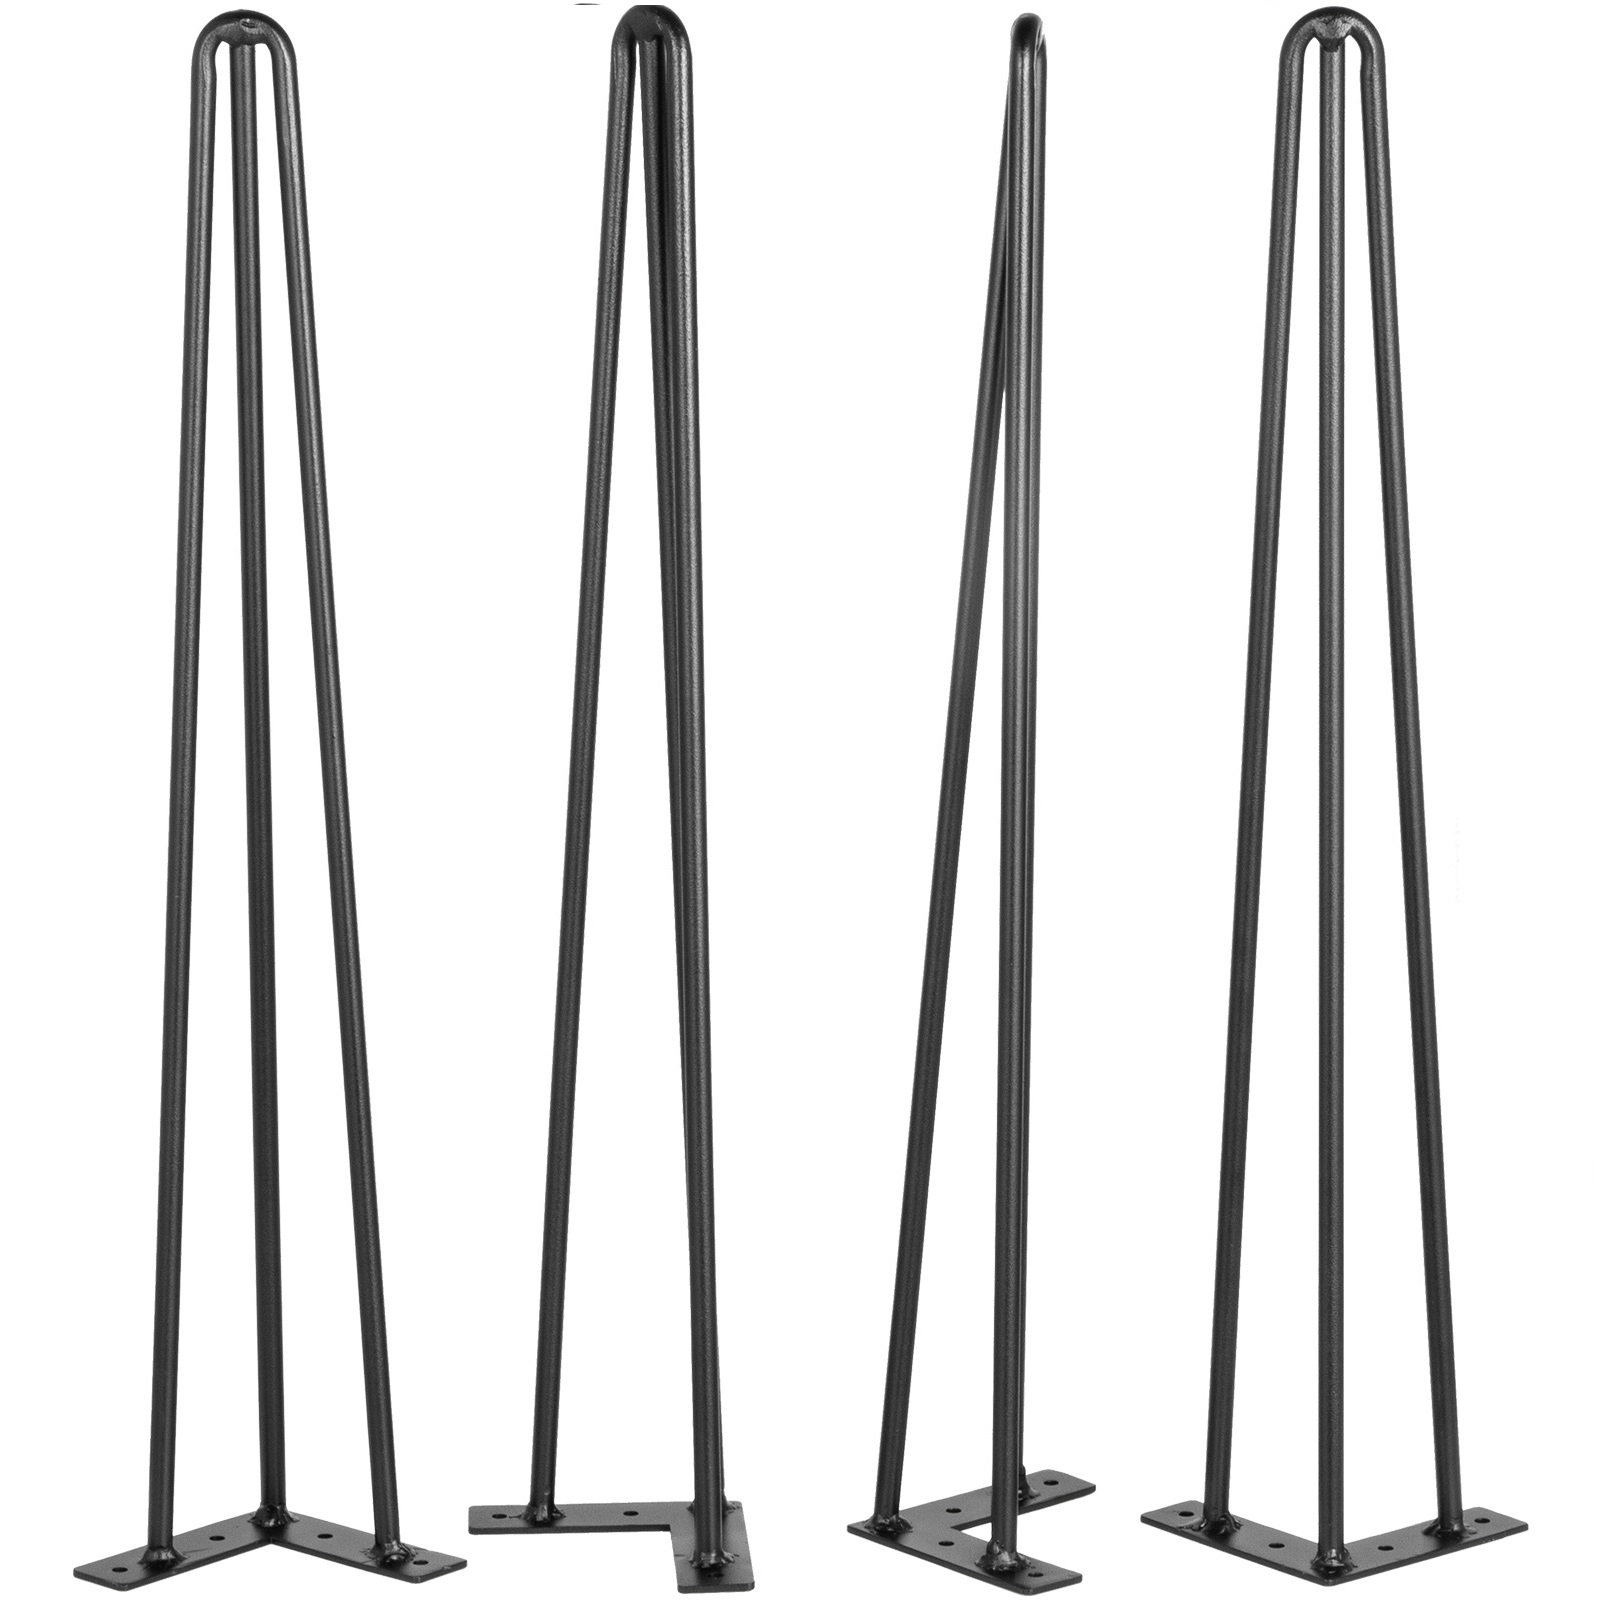 Vevor 26" Coffee Table Metal Hairpin Legs Solid Carbon Steel Bar Black Set Of 4 от Vevor Many GEOs